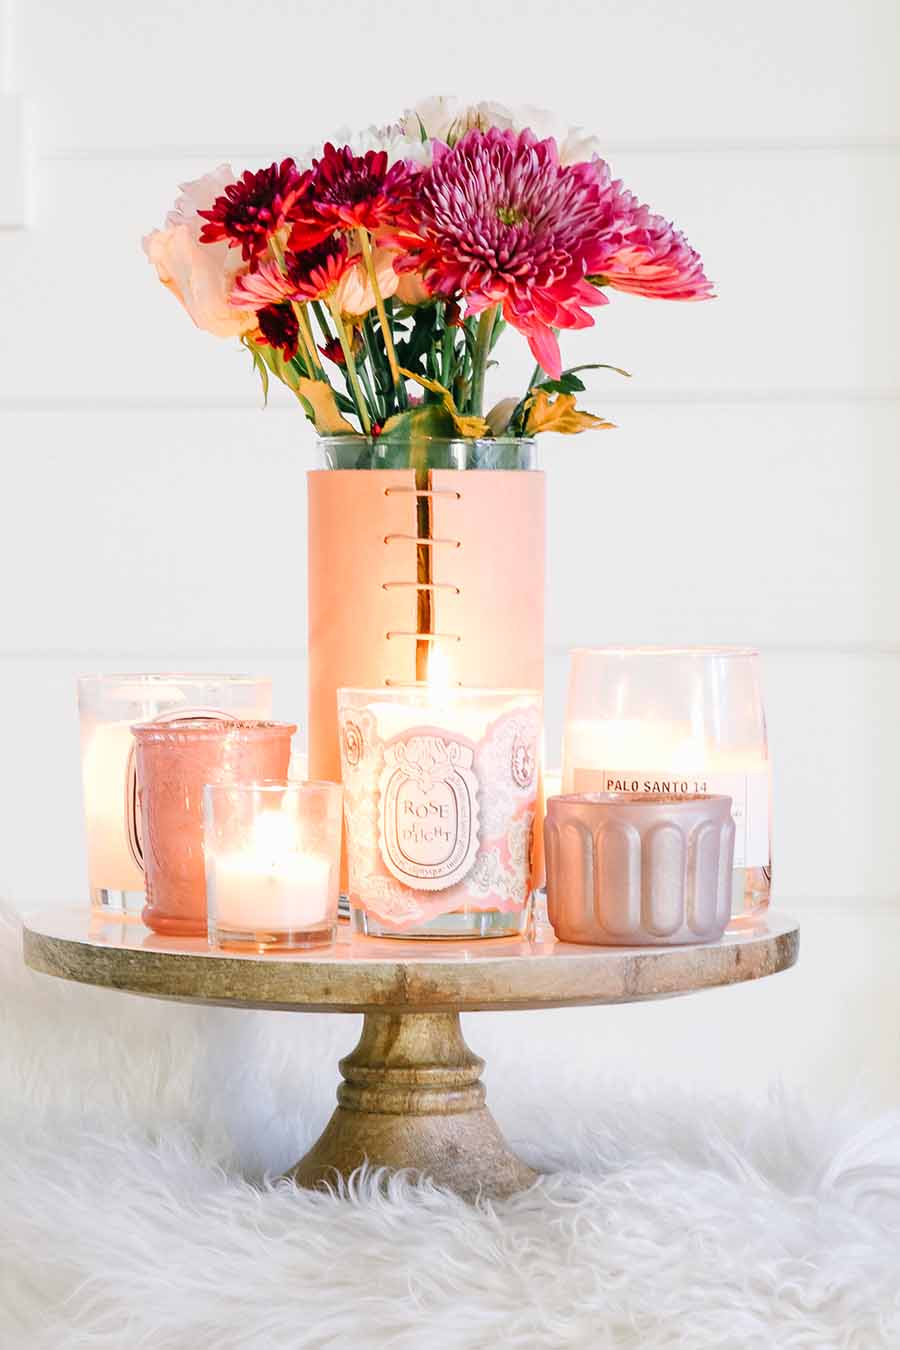 Candles on cake stands are the best way to display them. Cake stands are easy ways to decorate a table or your home. I have gathered some Cute Ways to Use a Cake Stand that I'm sure you'll love. You can use them for the holidays or even a wedding reception. They add drama and interest because of their styles and heights. #cakestands #decorating #weddings #flowers #decor